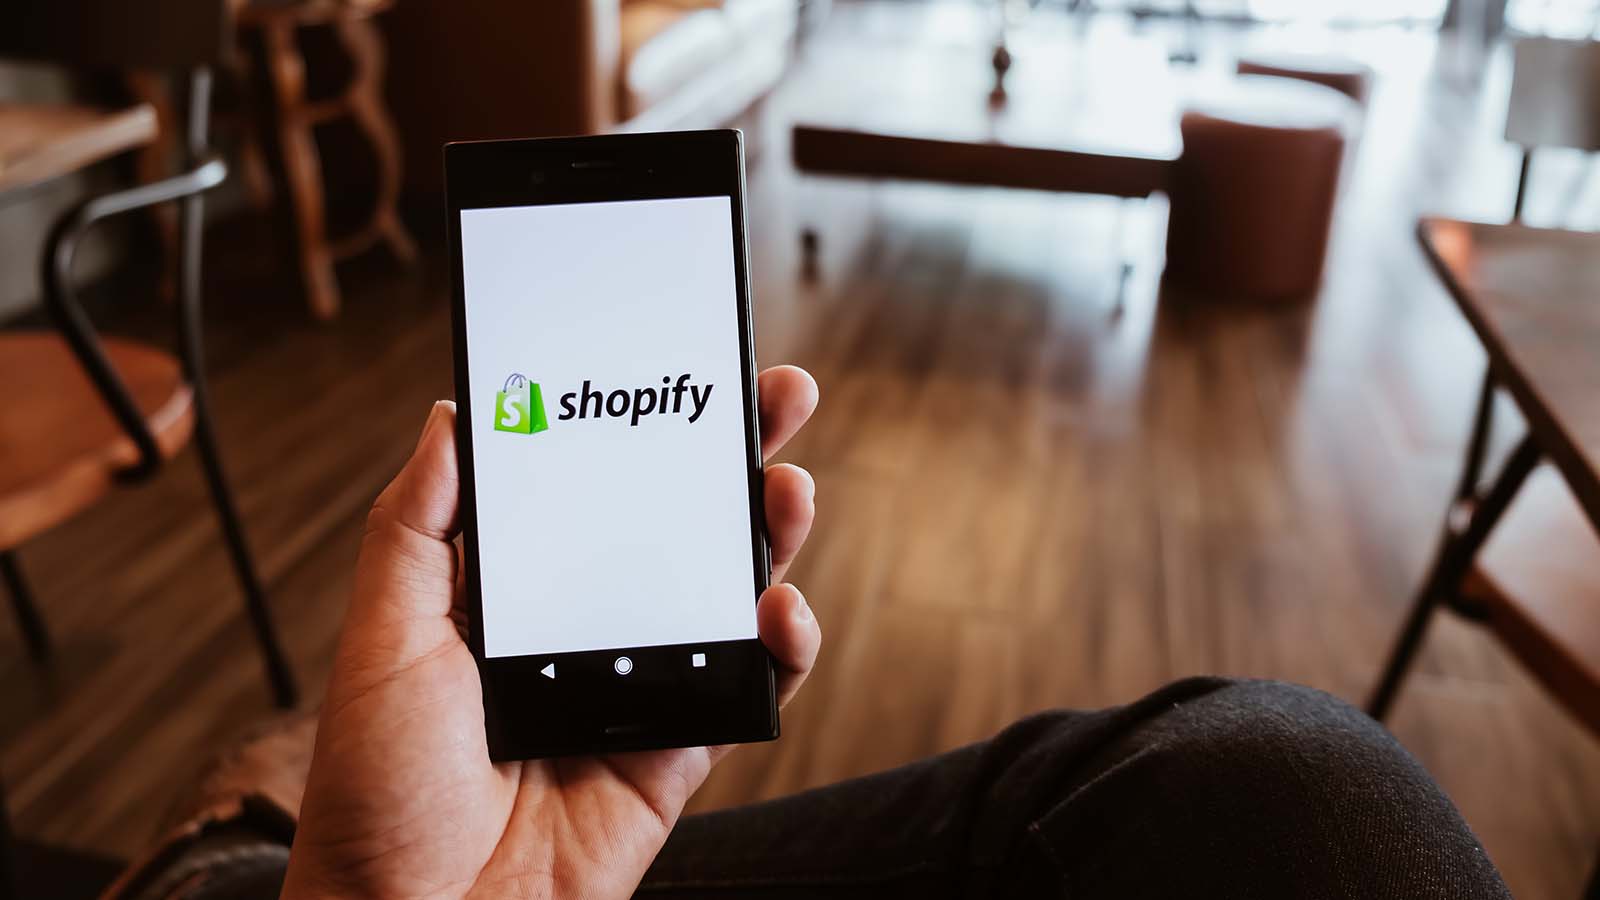 If You're Not in It for the Long Haul, Take Profits on Shopify Stock Now